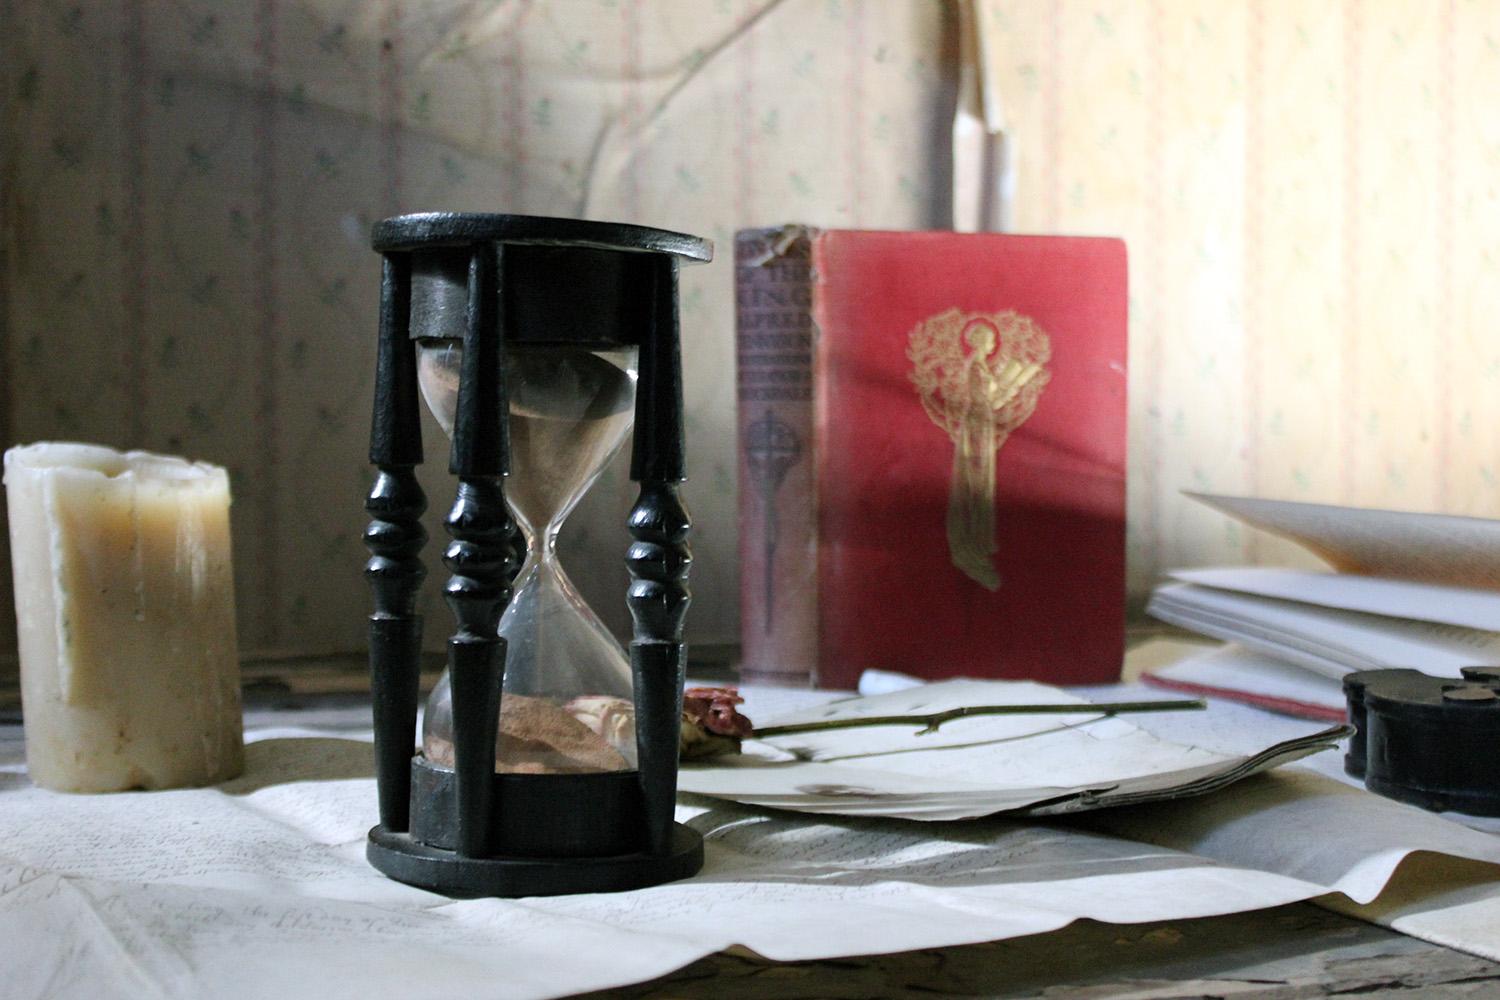 Of typical form, the ebonised oak hourglass or sand-timer, with draught turned ends and five turned columns enclosing the original sand filled glass vial, the whole surviving from Georgian period England.

The items nature means it has been well